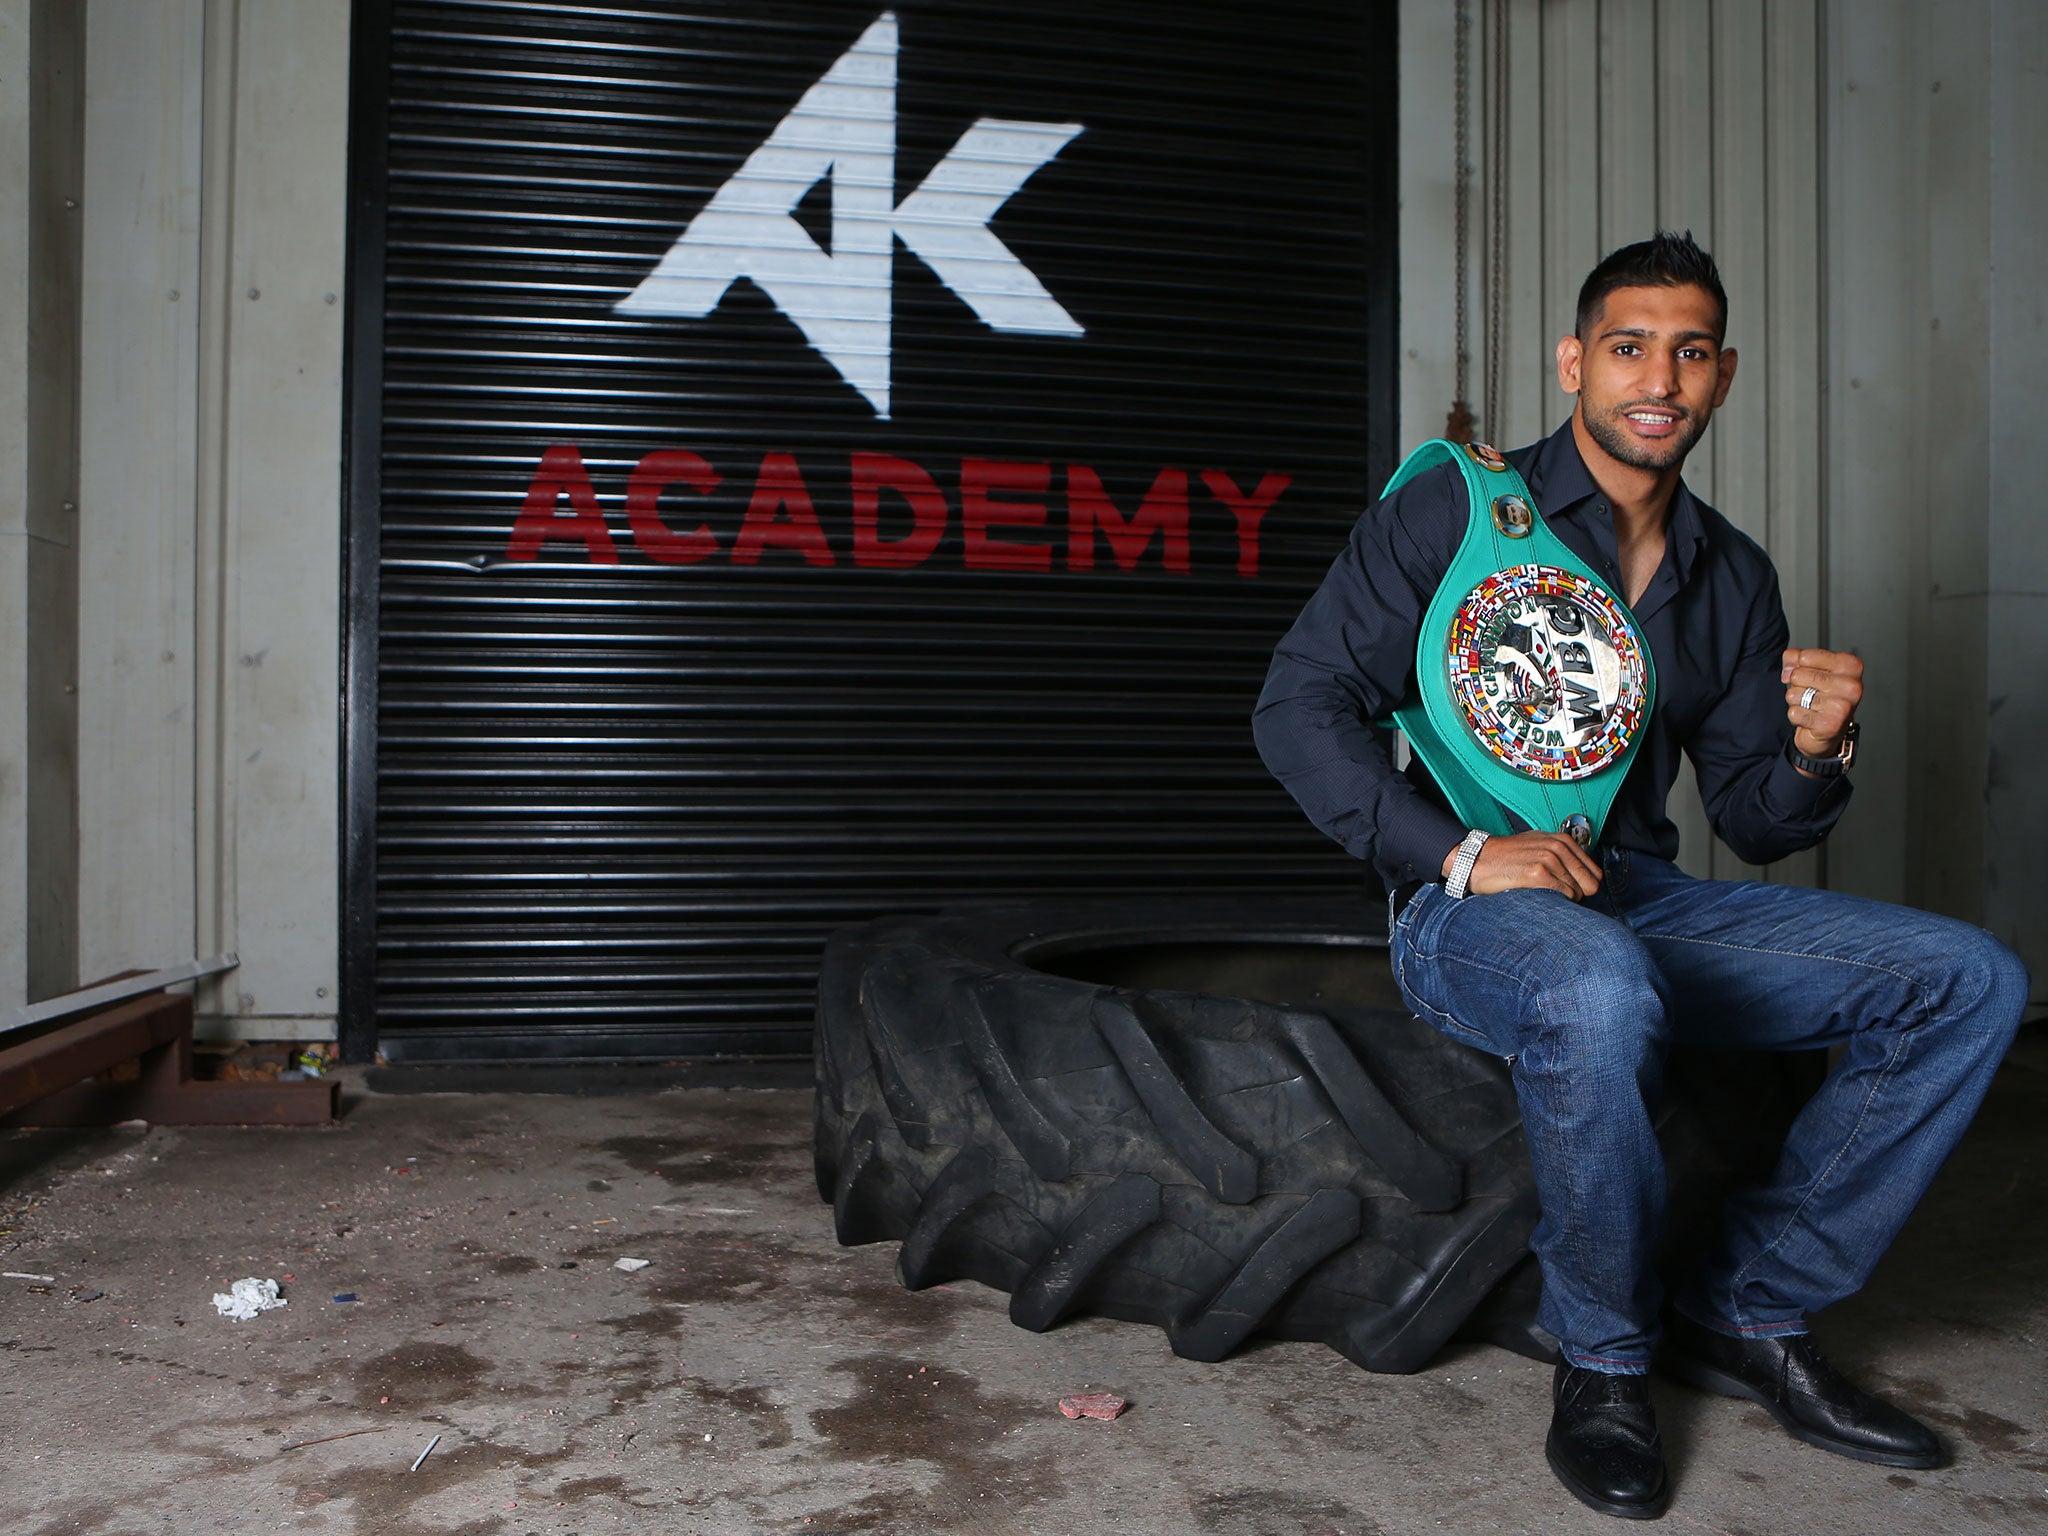 Amir Khan’s win over Chris Algieri last weekend put him in contention to fight Floyd Mayweather Jnr